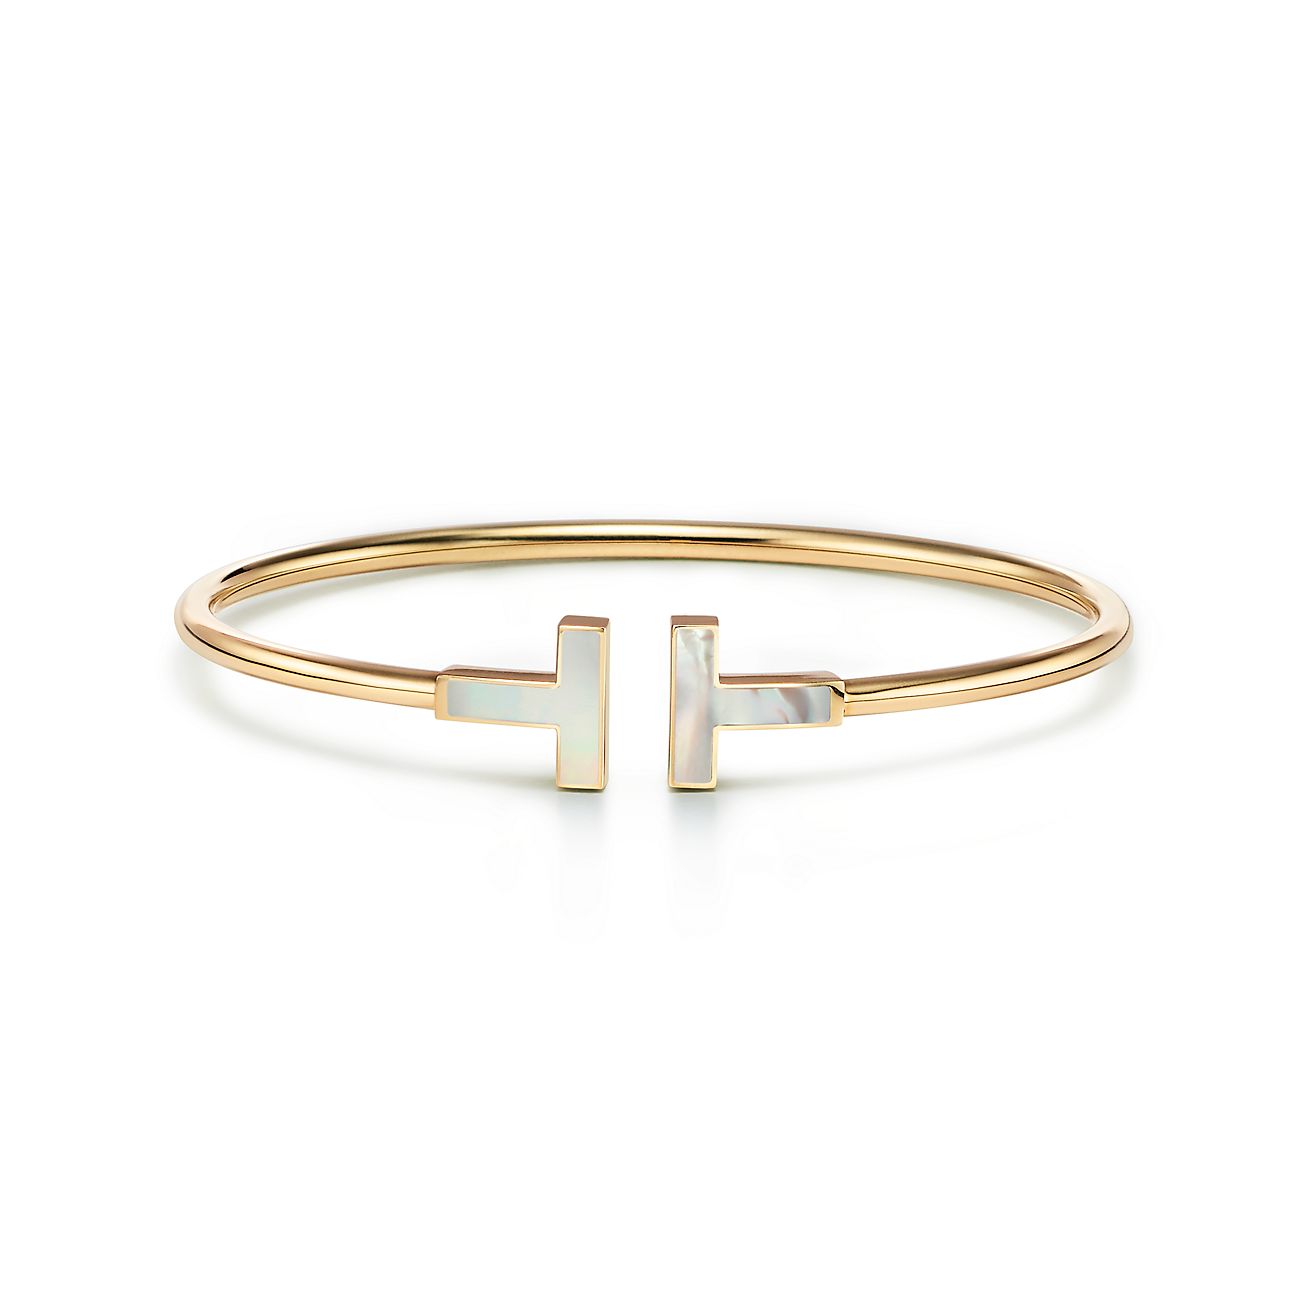 Tiffany T Wire Bracelet in Yellow Gold with Mother-of-pearl | Tiffany & Co.